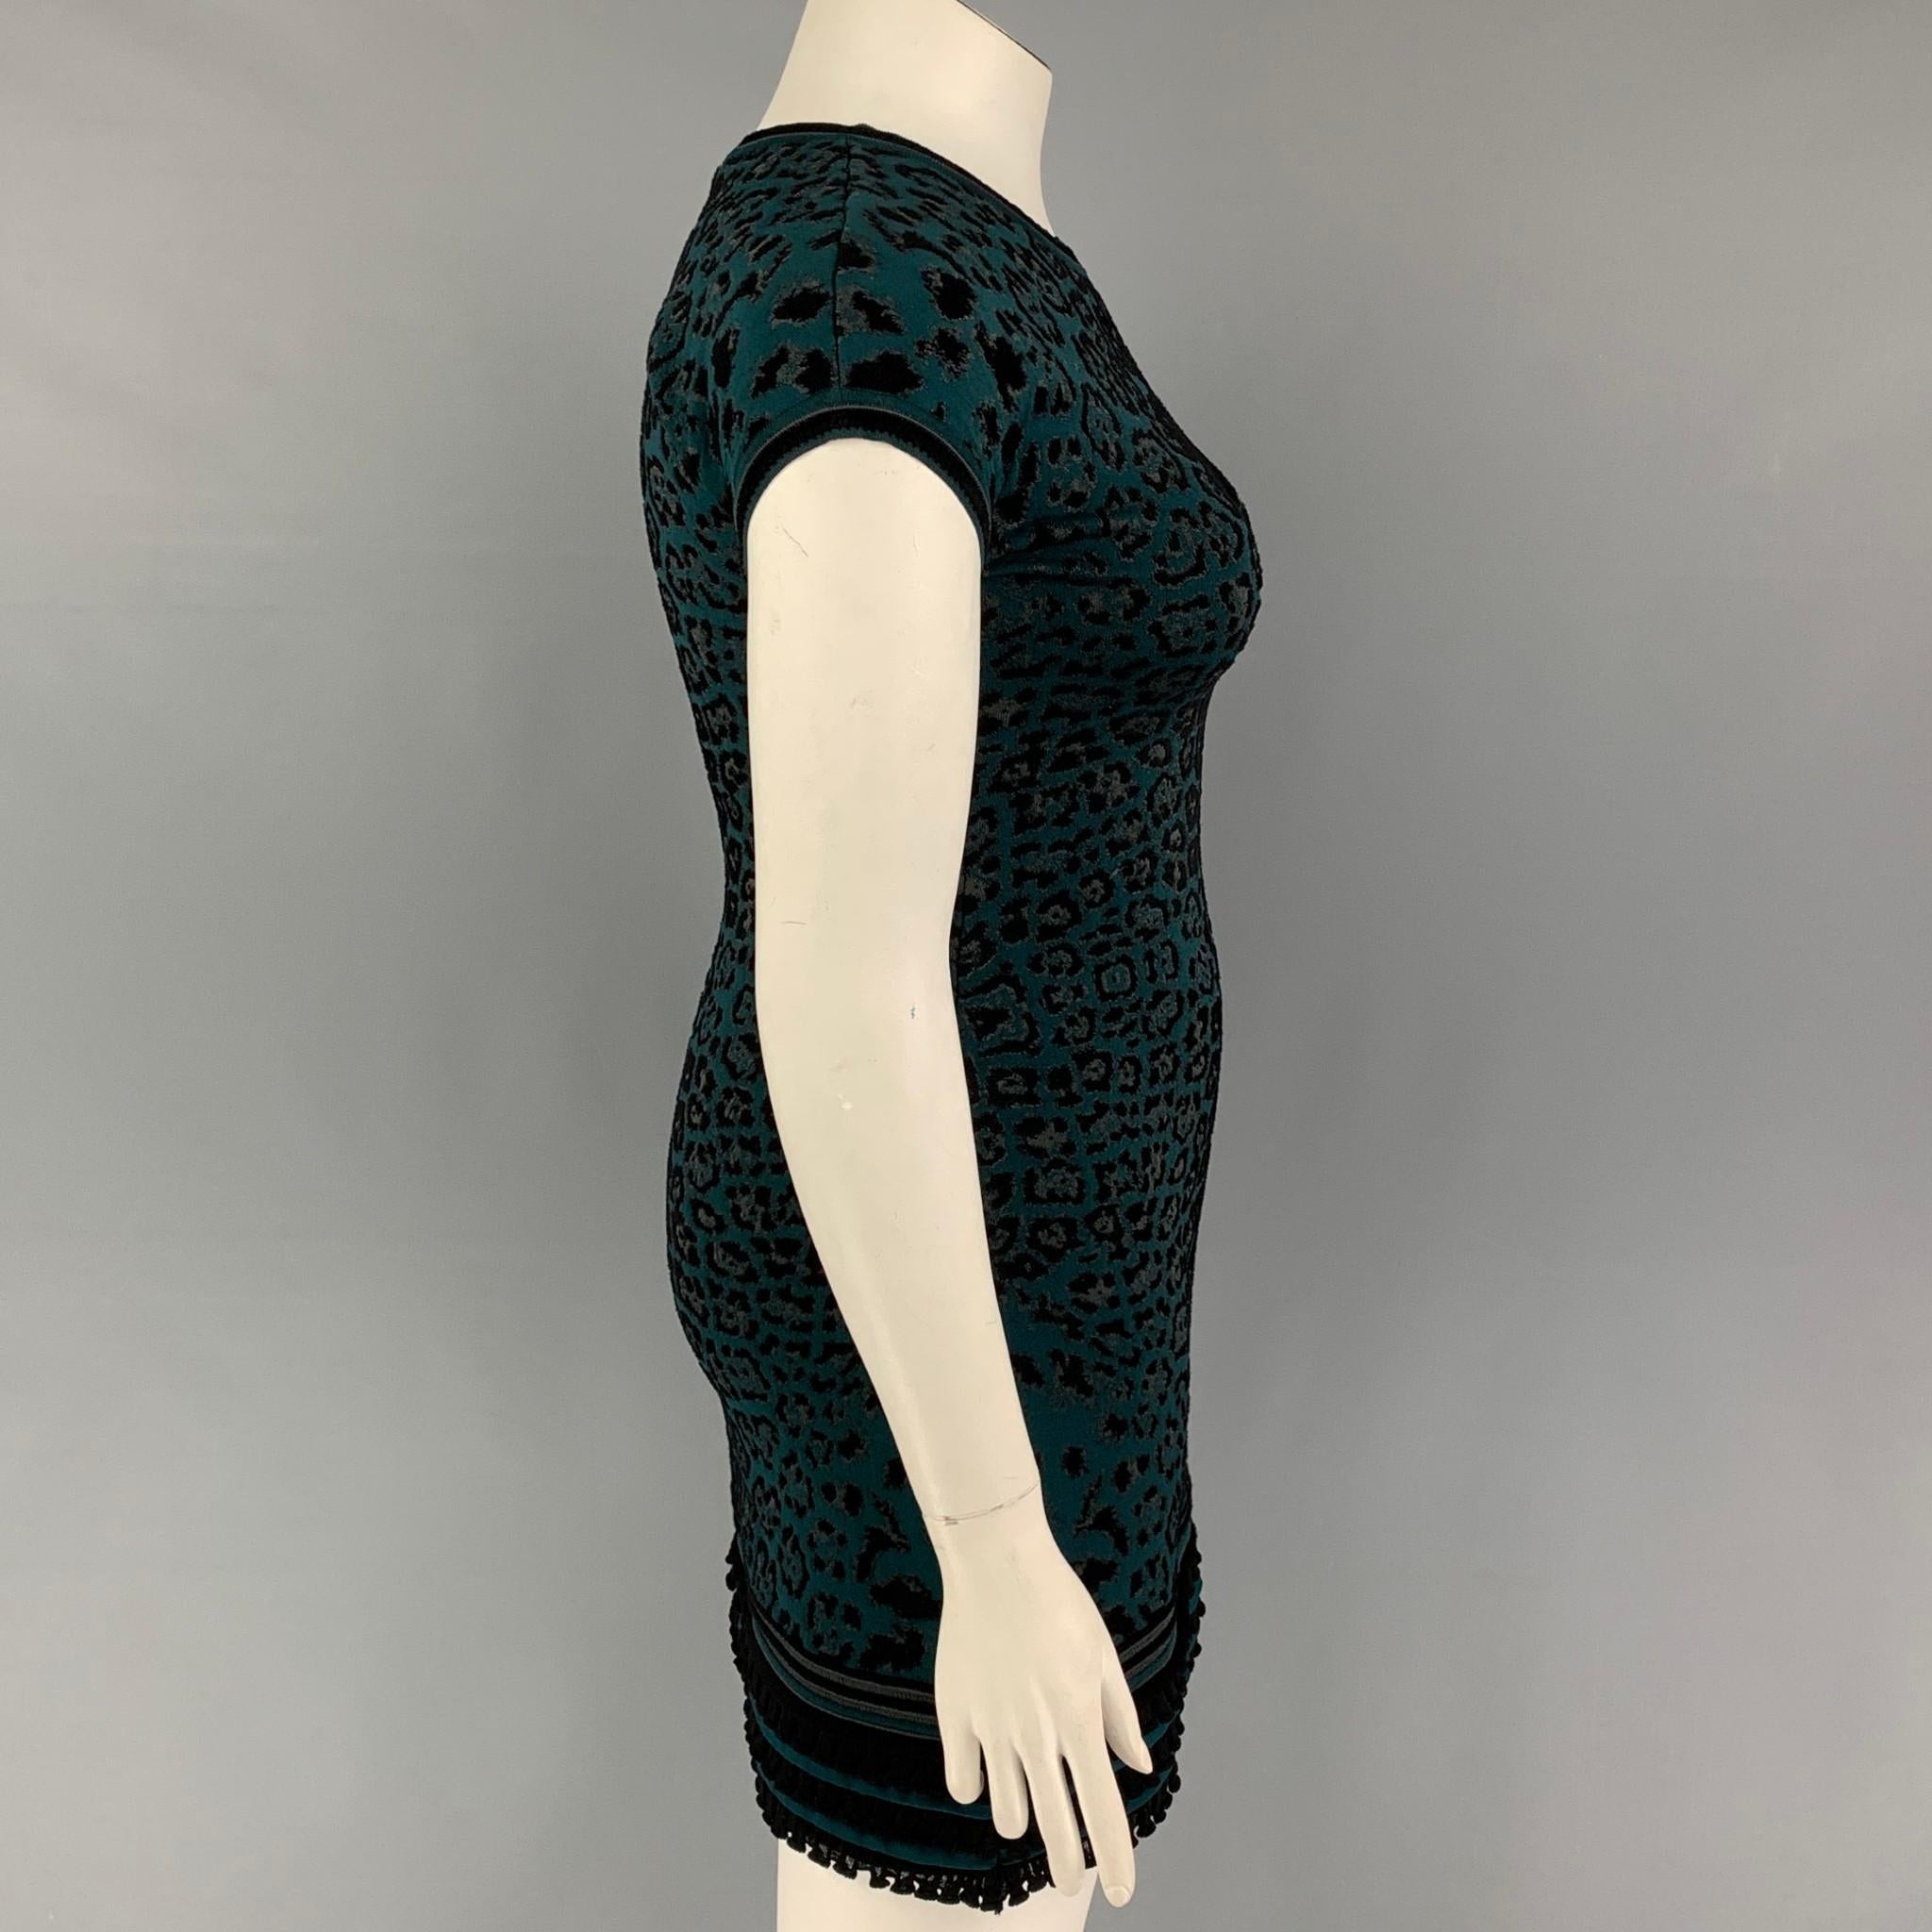 ROBERTO CAVALLI dress comes in a black & green animal print viscose blend featuring a a-line style, slim fit, ruffled hem, and cap sleeves. Made in Italy. 

Very Good Pre-Owned Condition.
Marked: 44

Measurements:

Shoulder:
Bust: 34 in.
Waist: 27